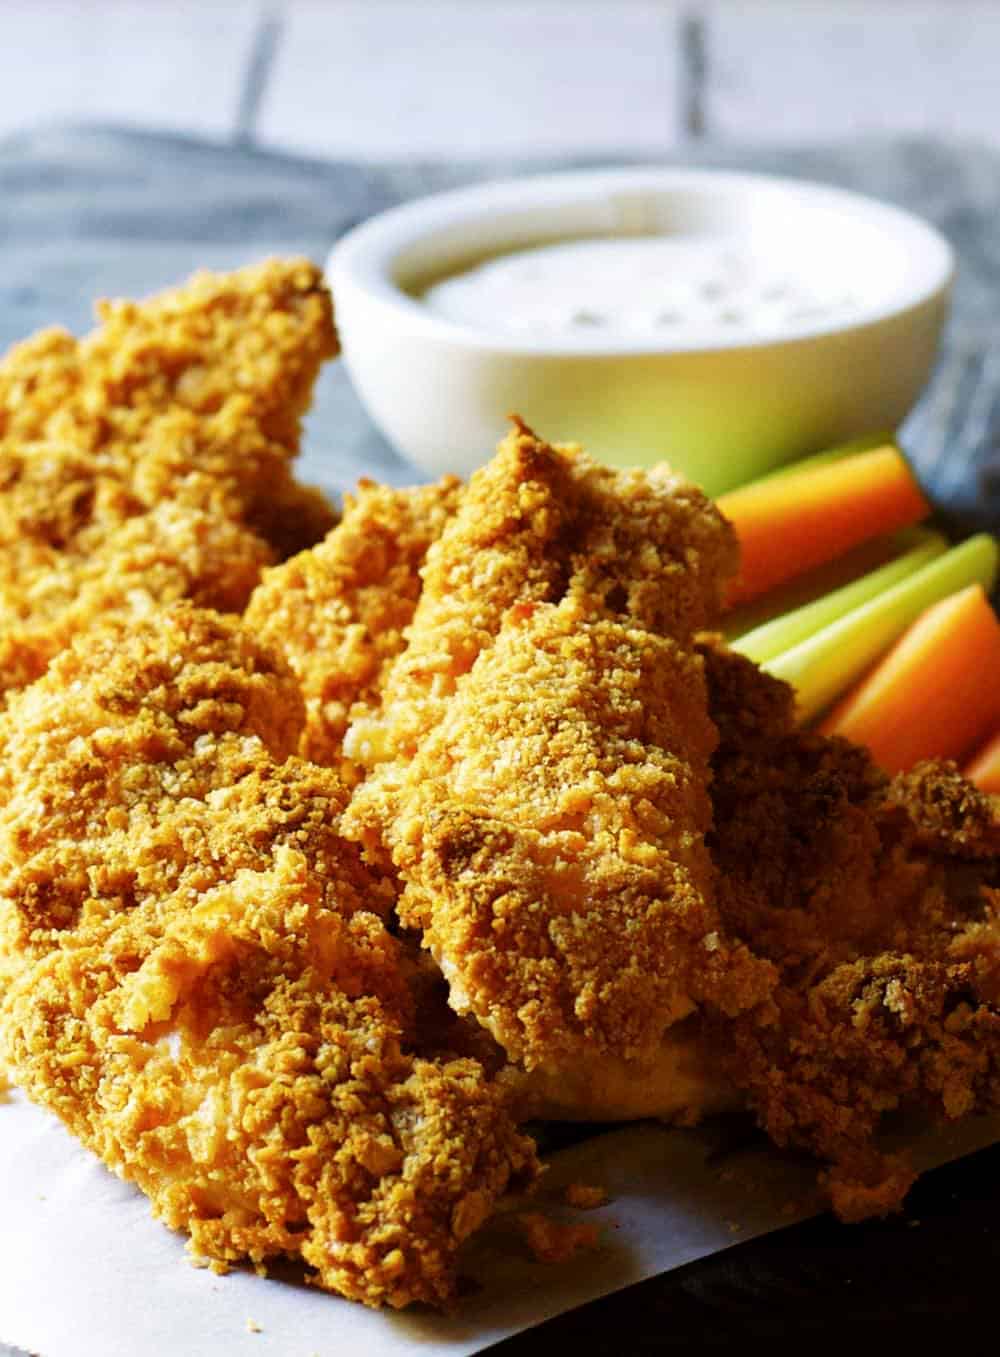 Delicious chicken tenders with a tantalizing dipping sauce, served on a plate.